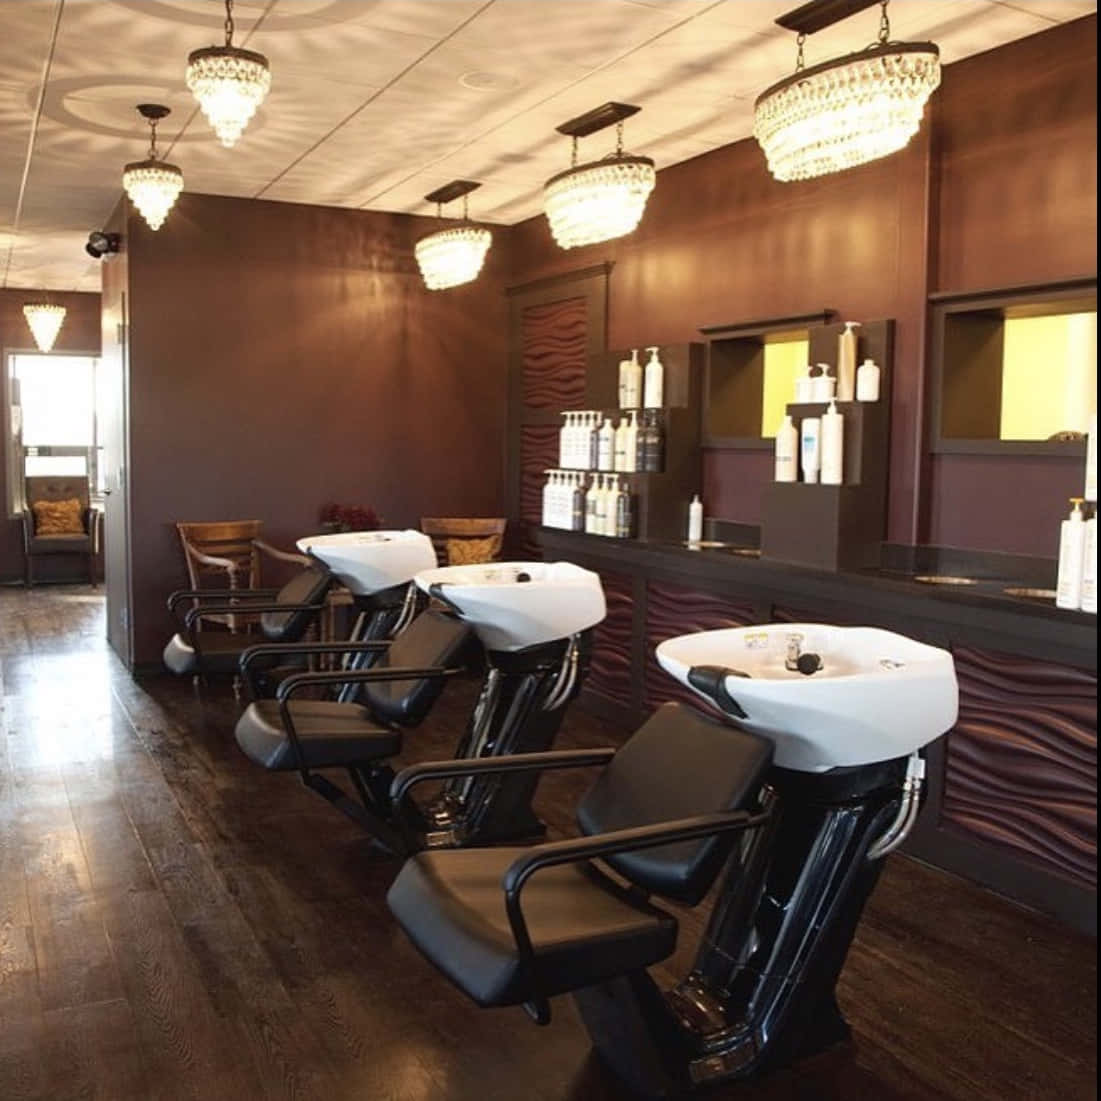 A Salon With Chairs And A Mirror